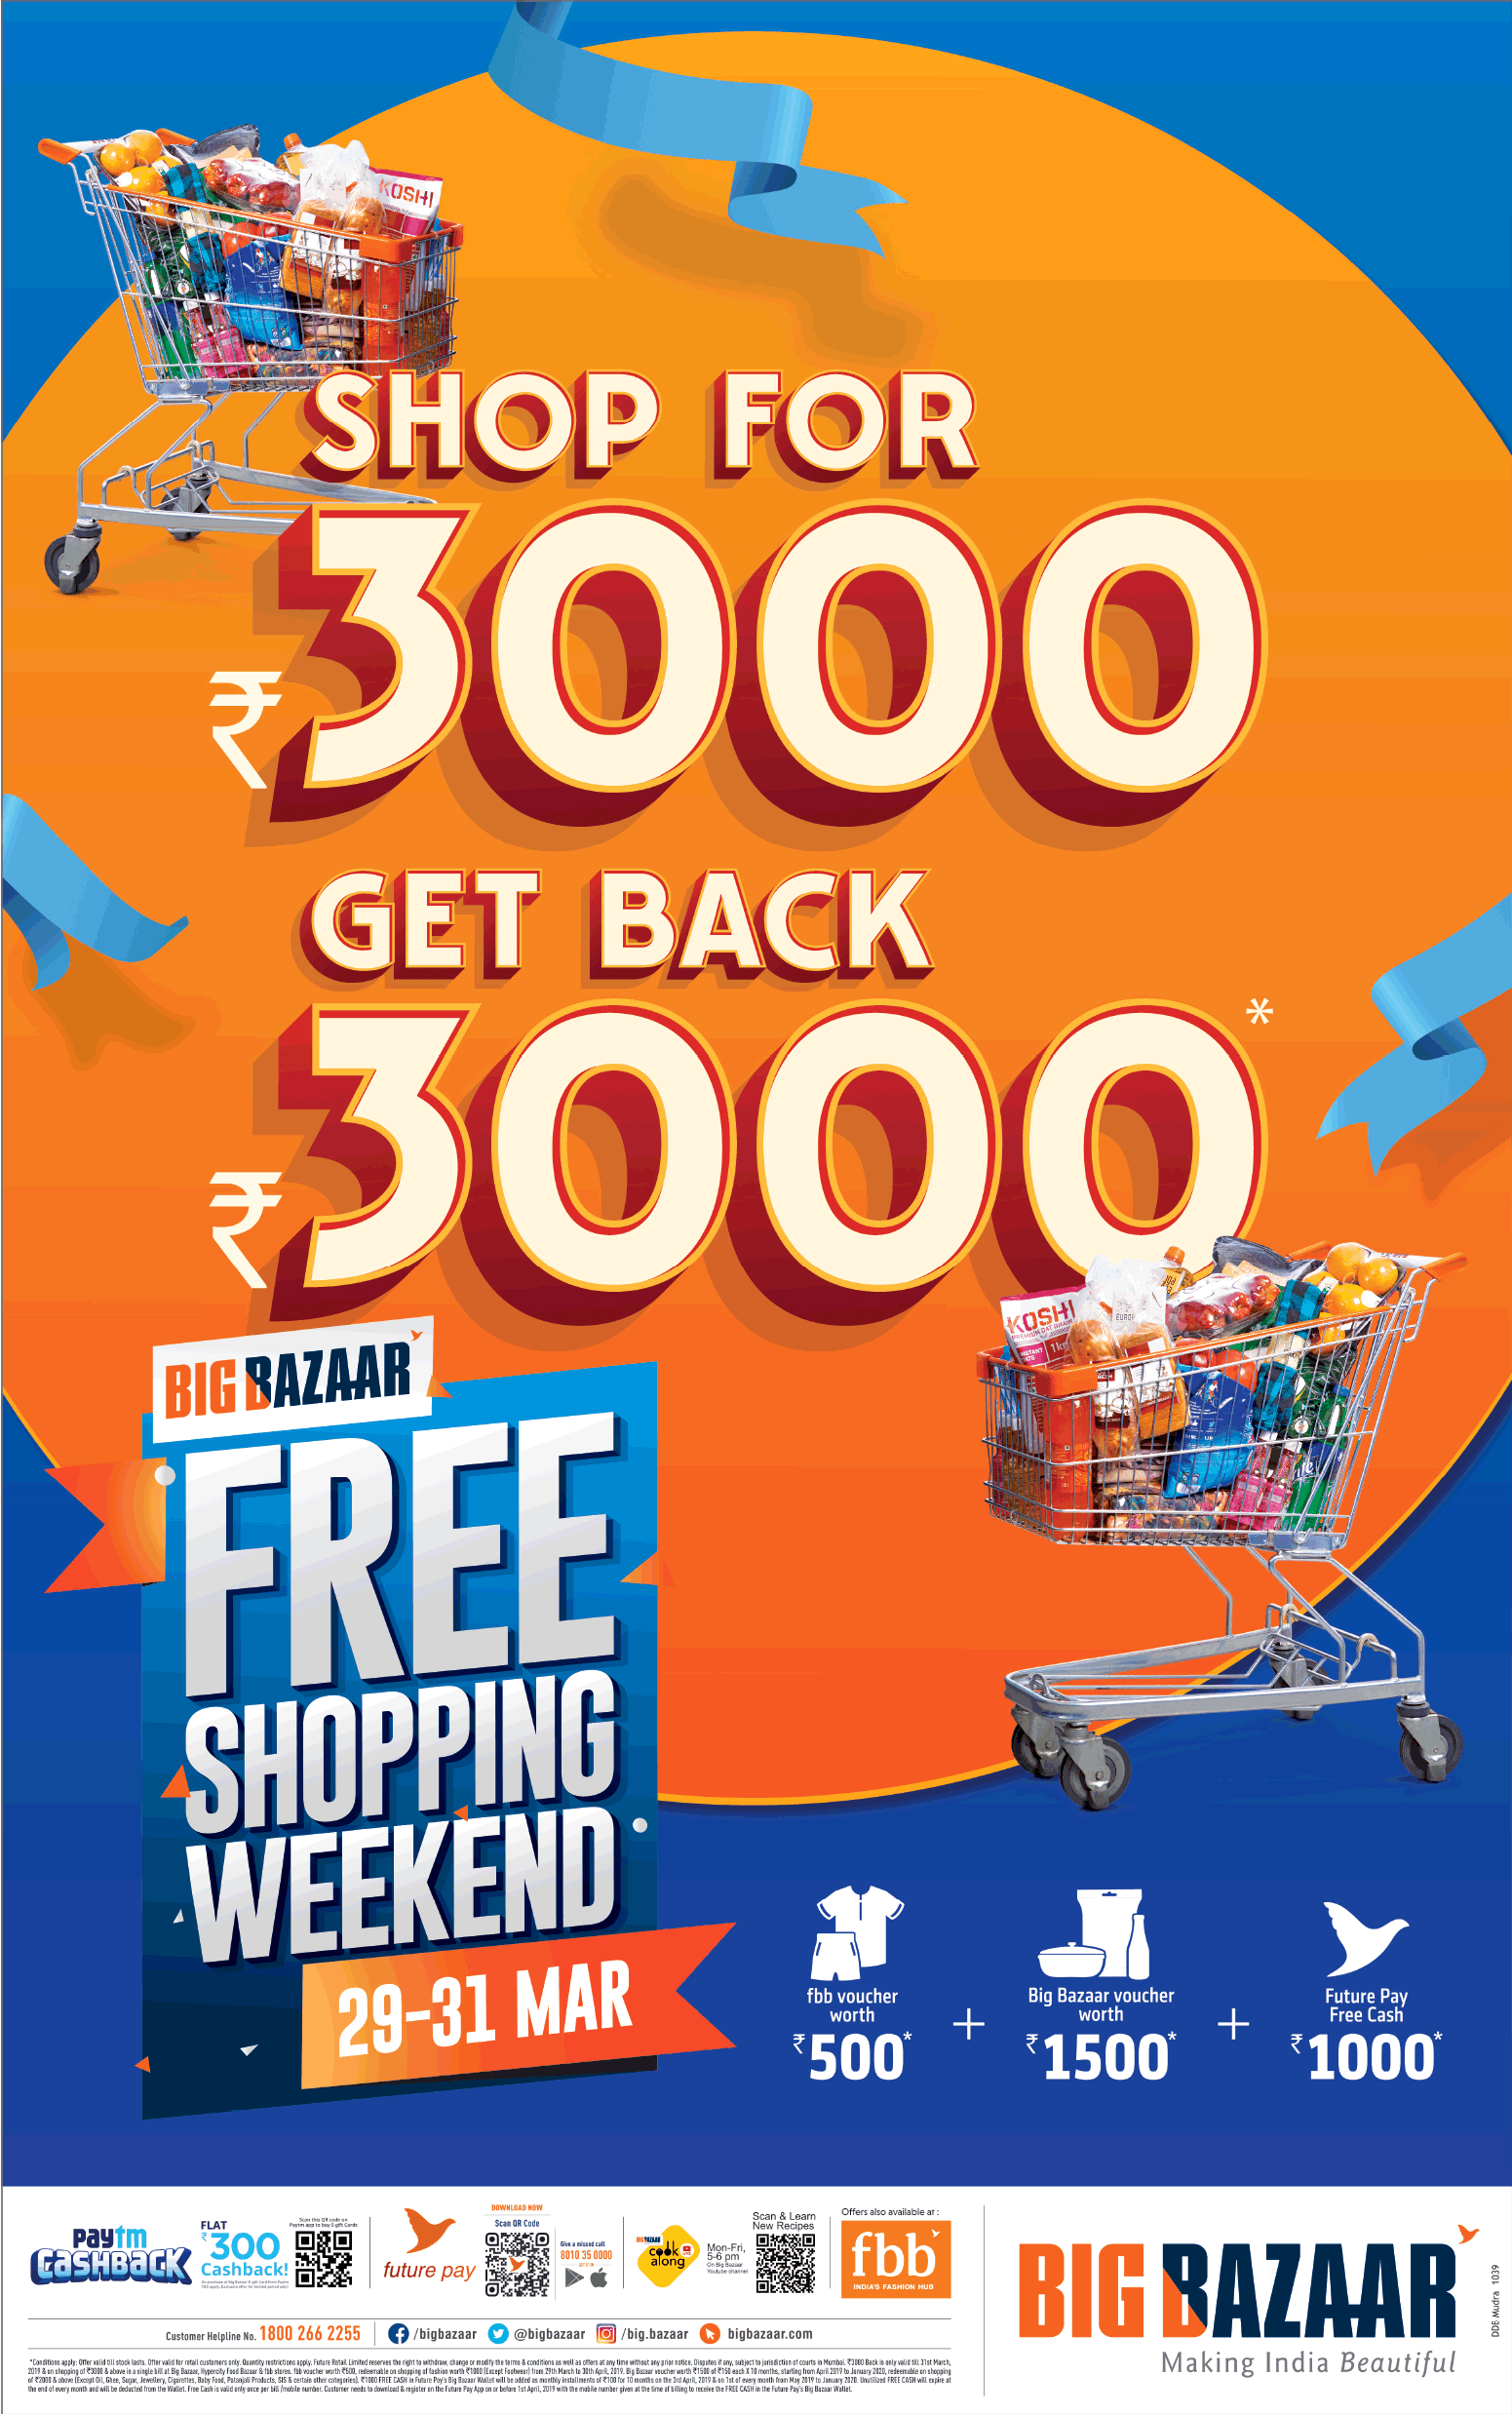 big-bazaar-shop-for-rs-3000-get-back-rs-3000-free-shopping-weekend-ad-bombay-times-29-03-2019.png